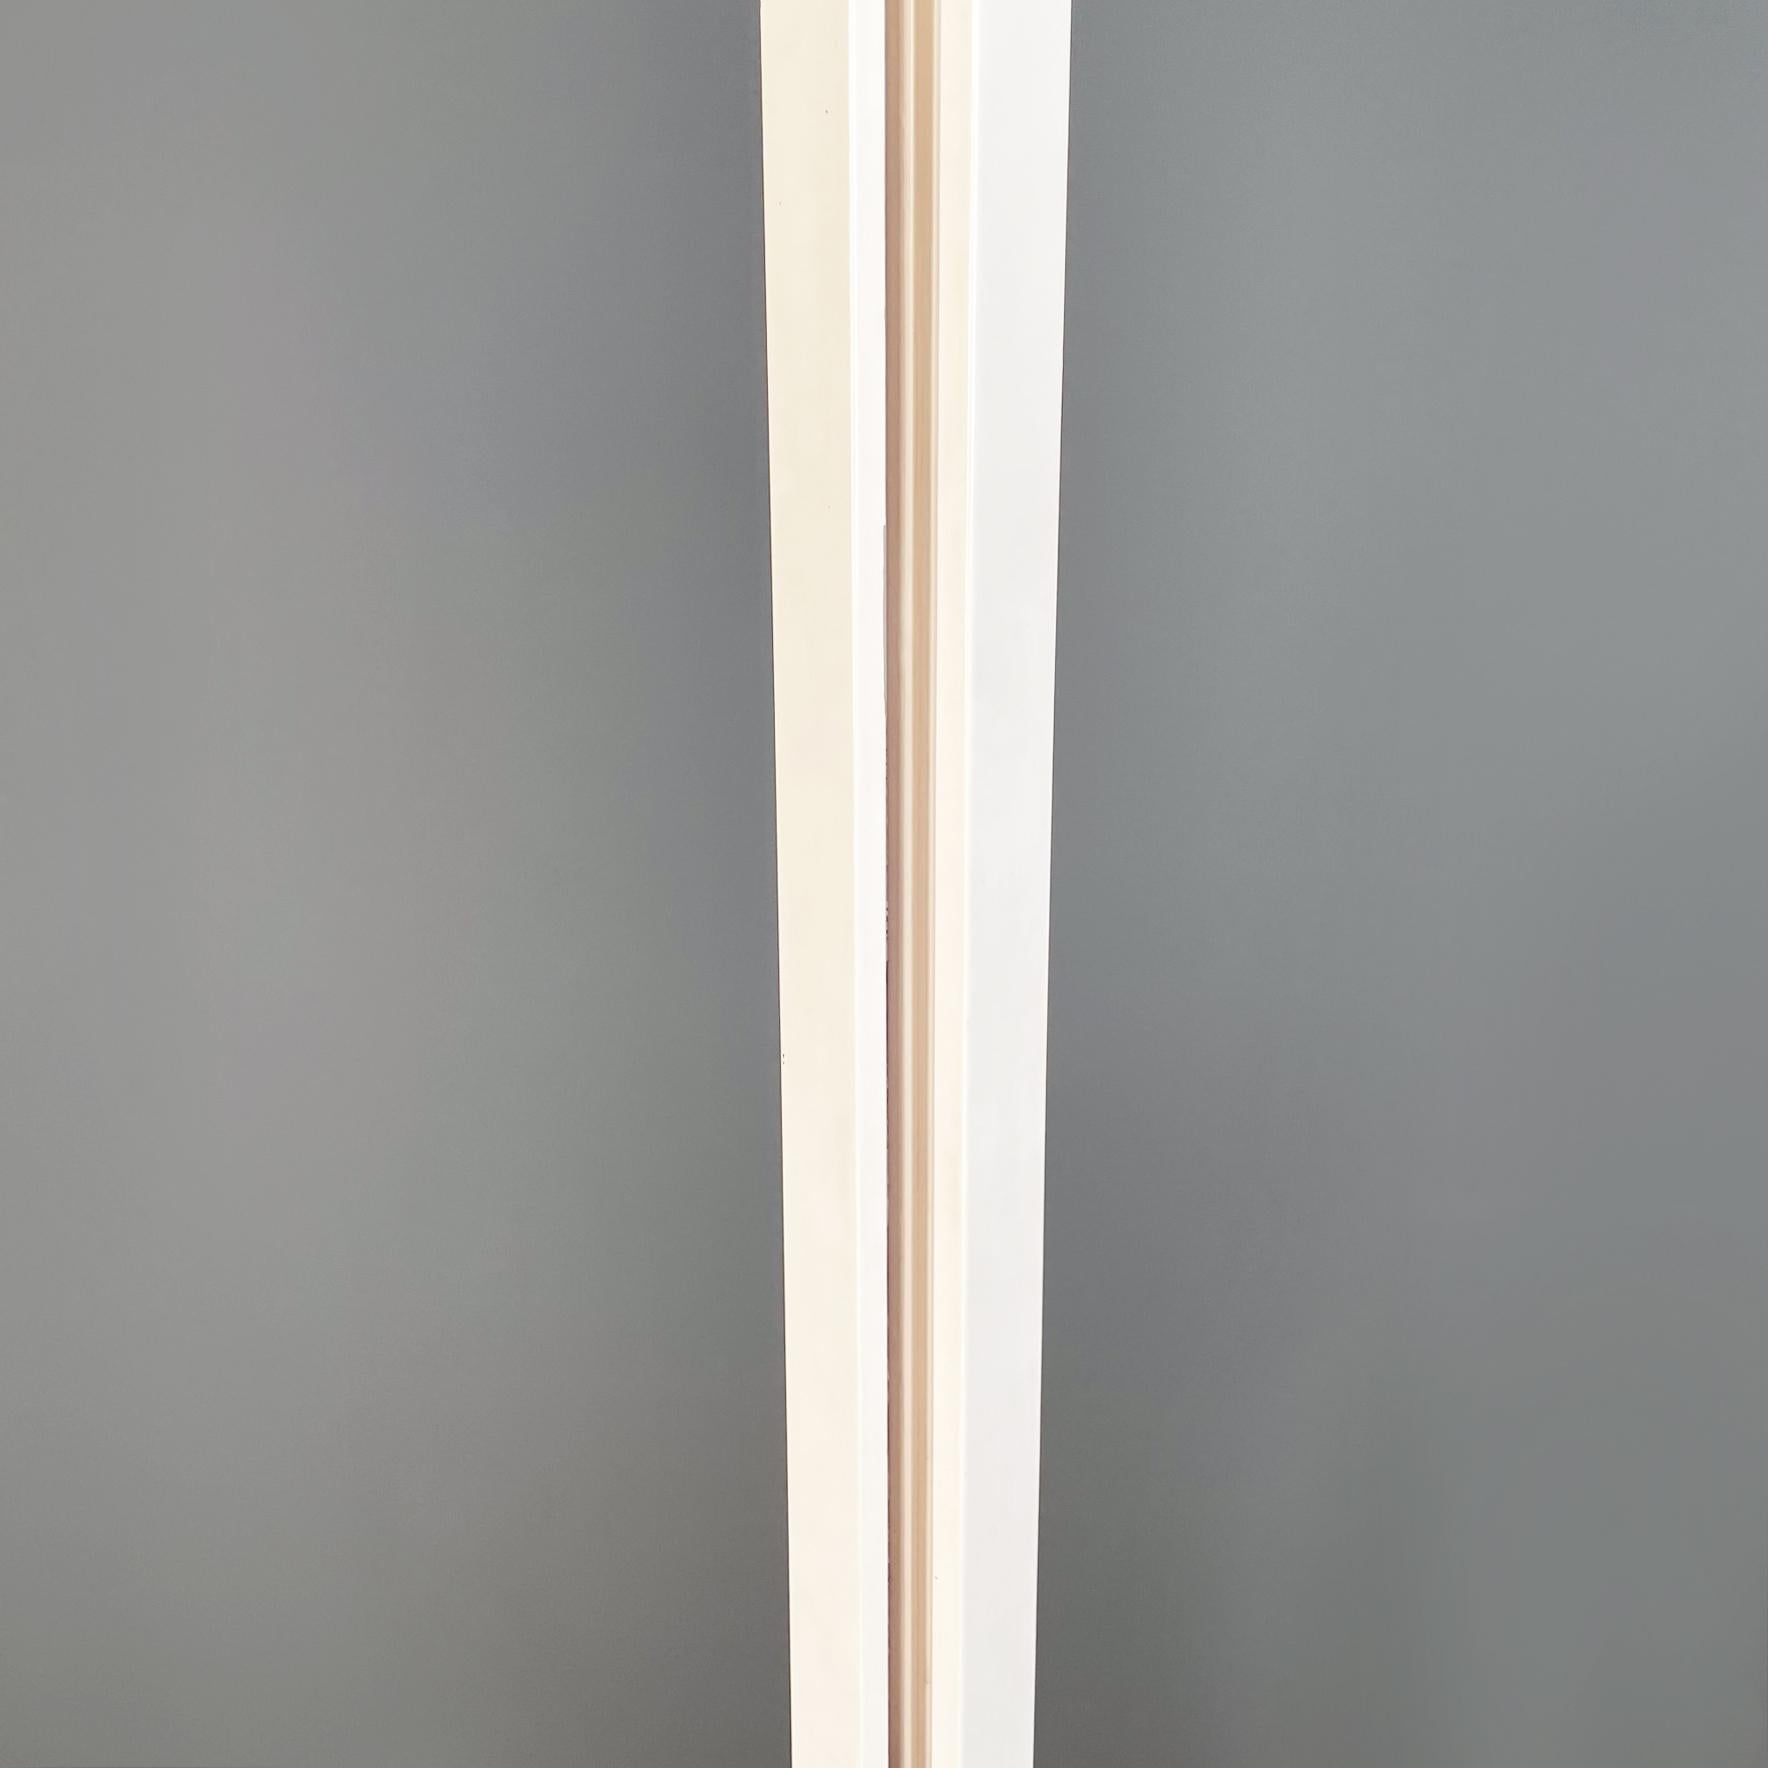 Italian Midcentury White Wood Metal Coat Stand by Carlo de Carli for Fiarm, 1960 For Sale 4